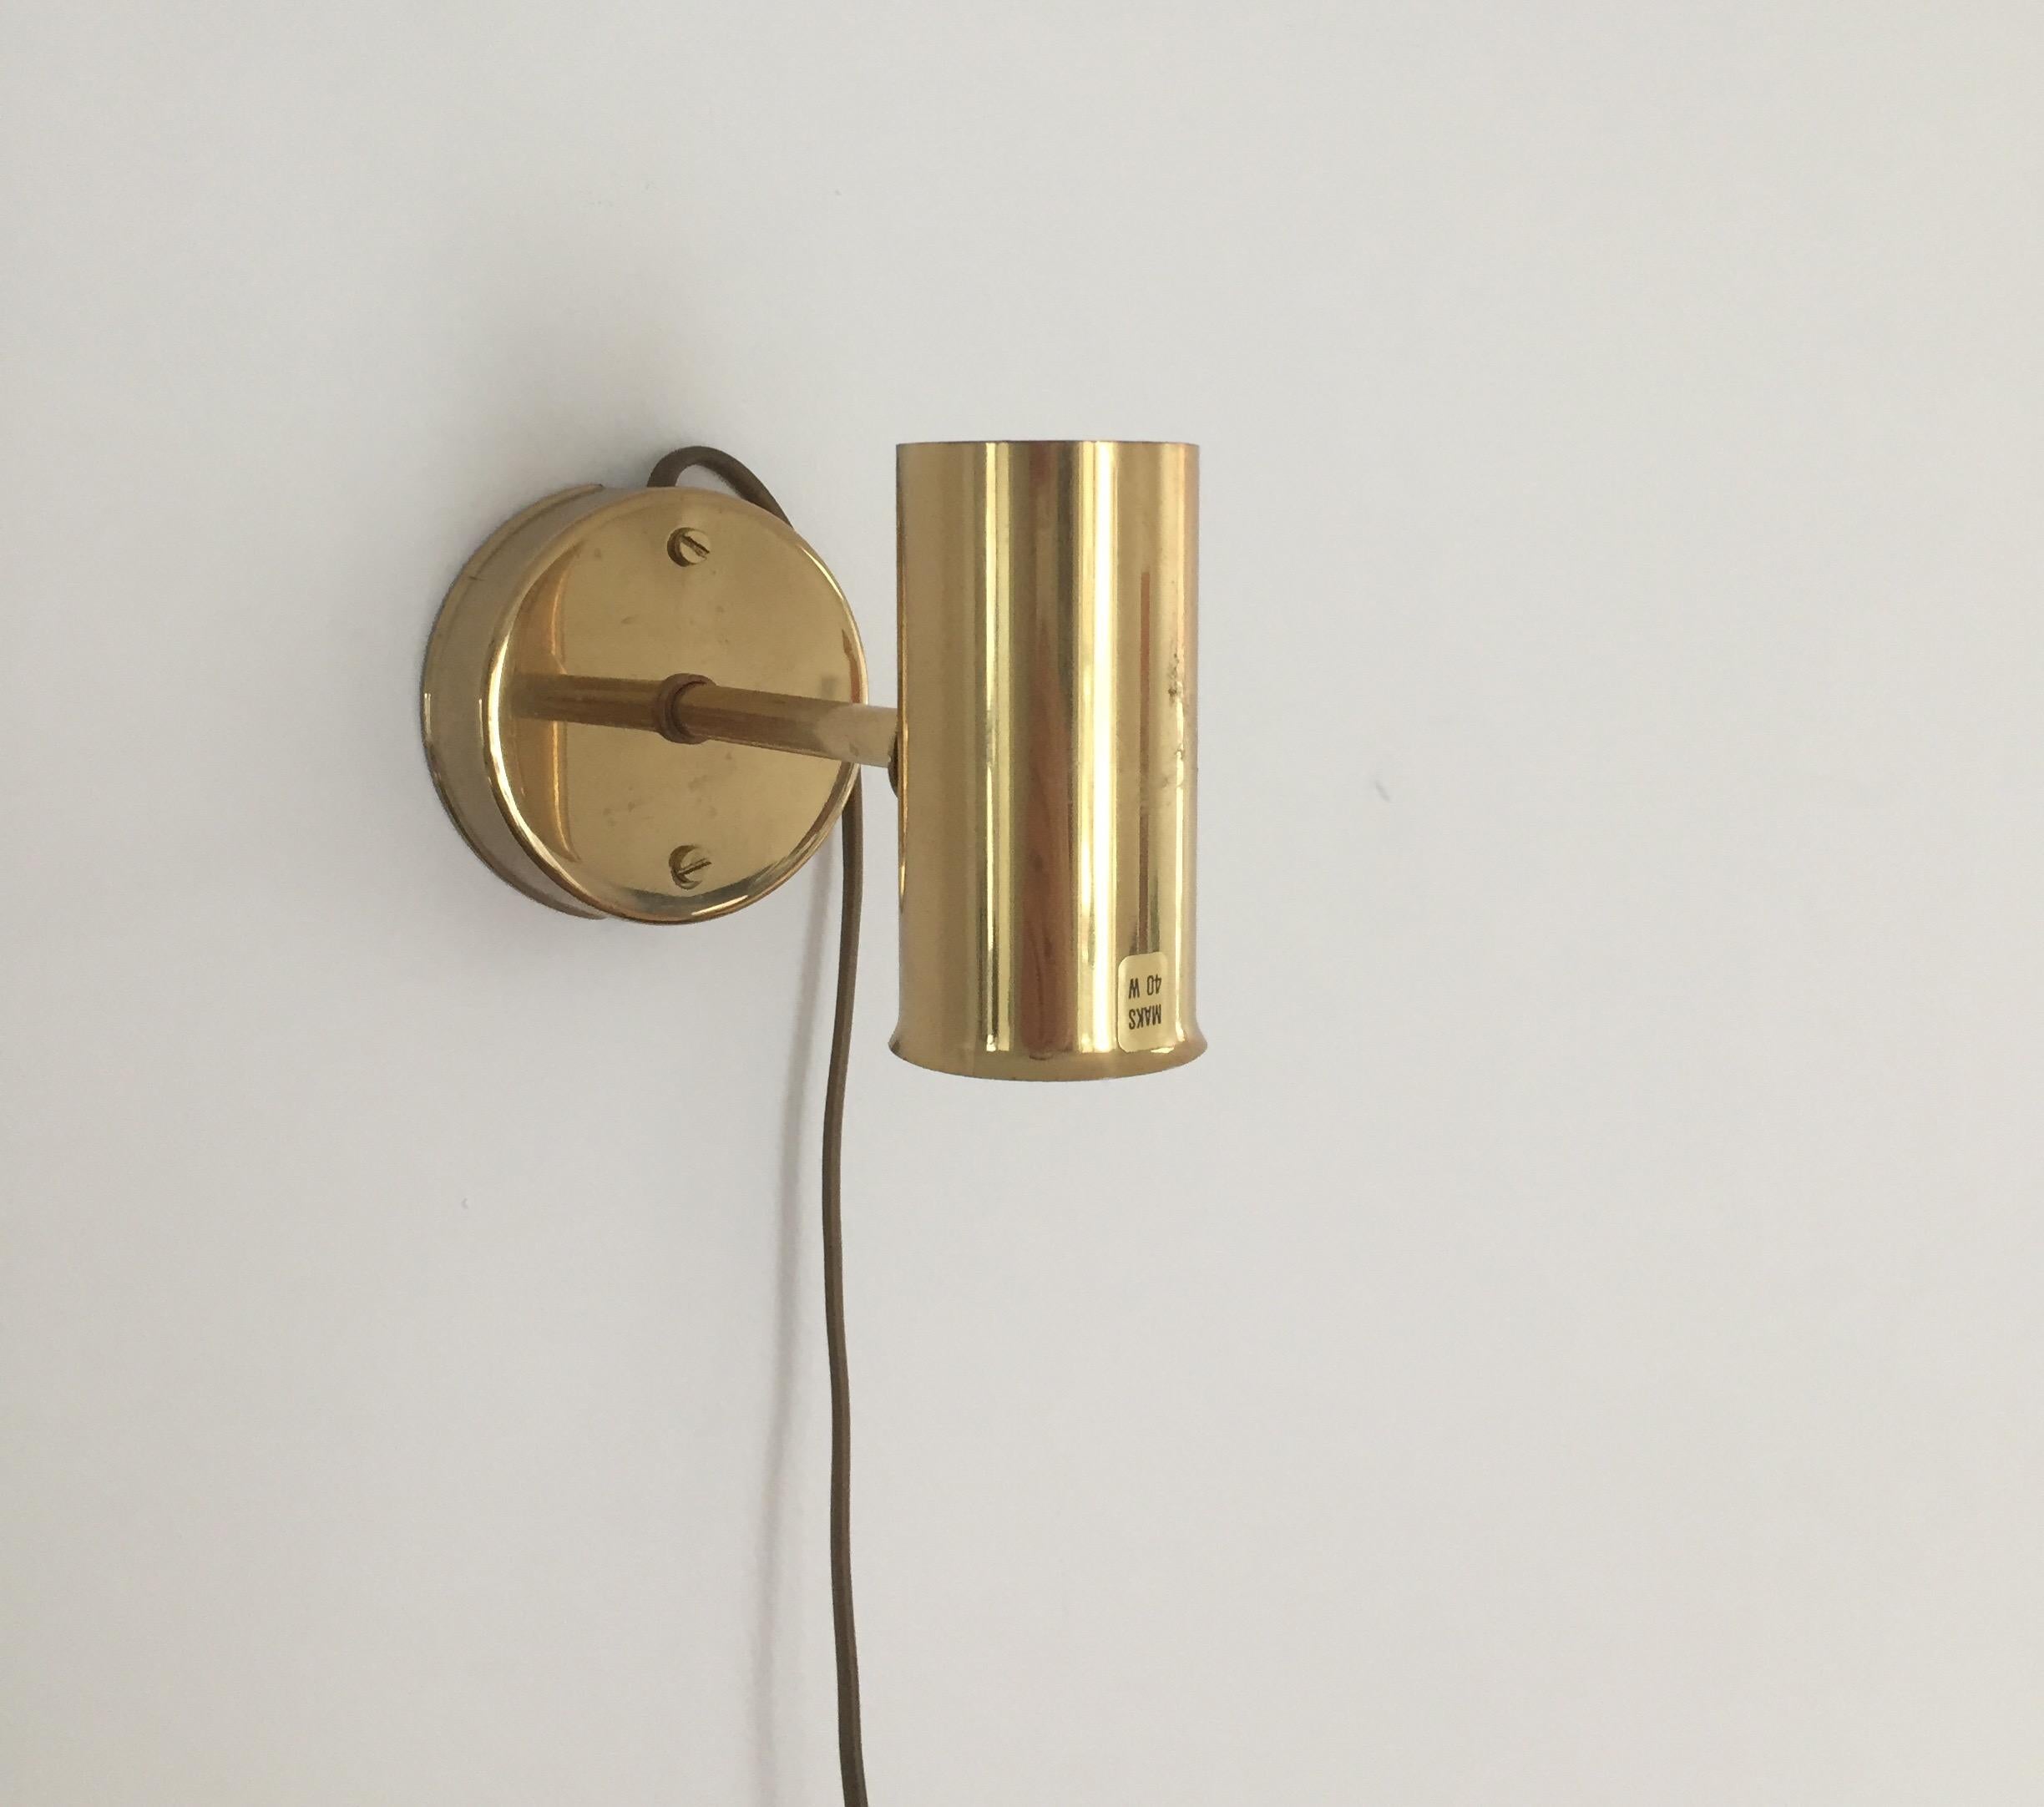 Brass wall lamps in the style of Scandinavian modern.
Designed and possibly produced in Norway in the 1950s-1960s.